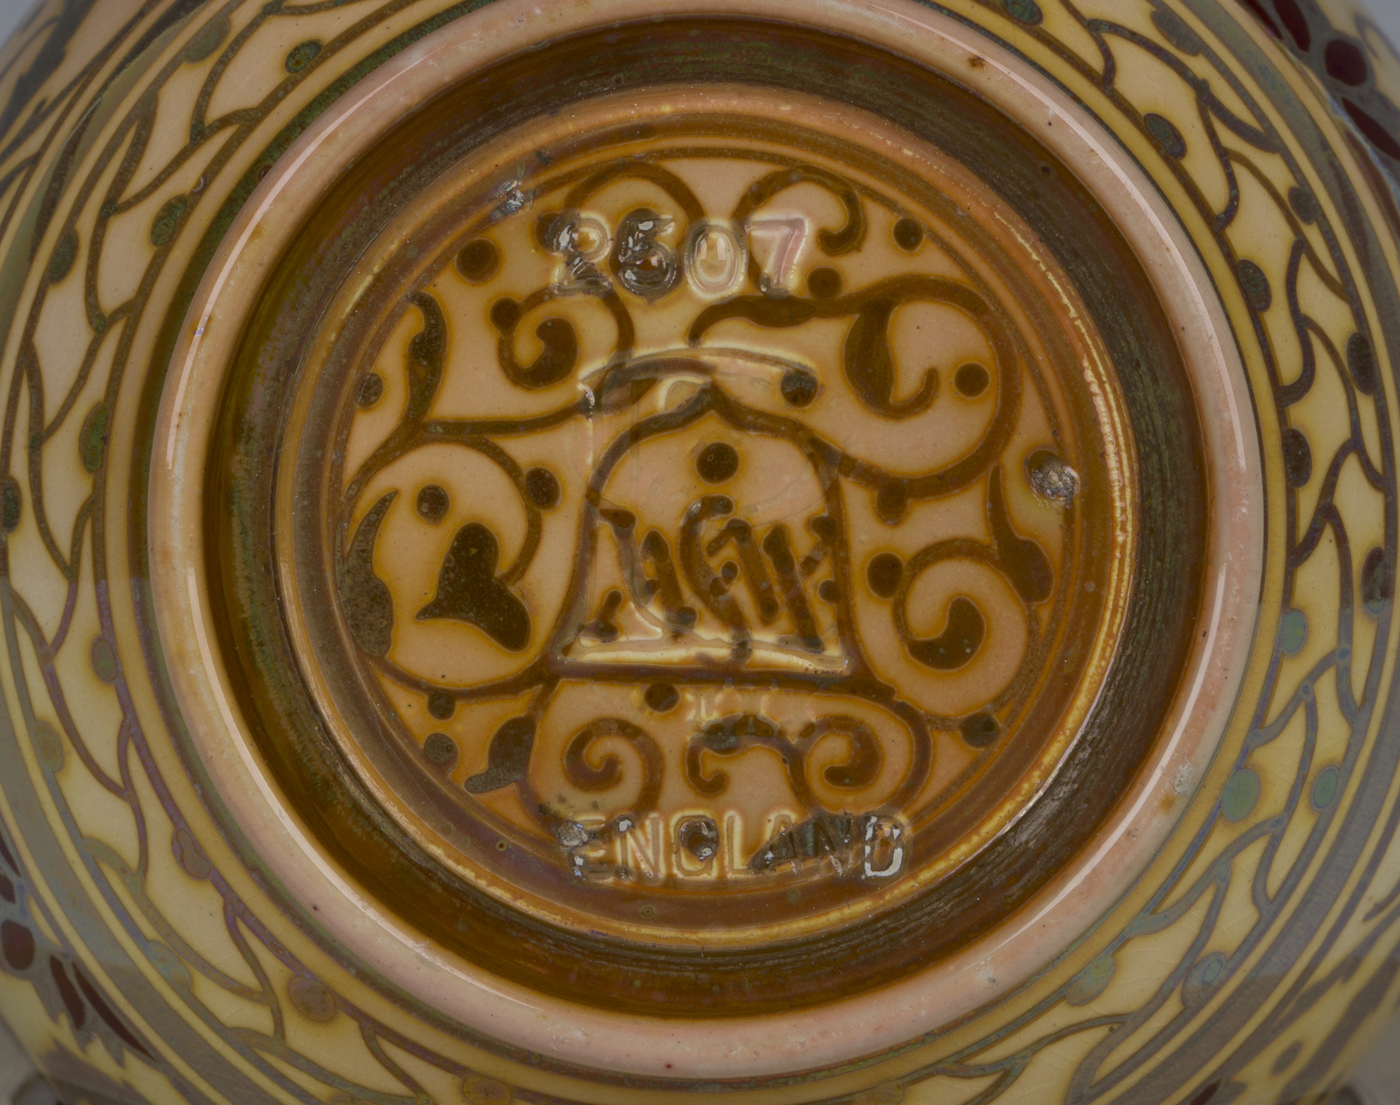 A Pilkington's Royal Lancastrian lustre vase, circa 1908, by William S. Mycock, monogrammed, the - Image 2 of 2